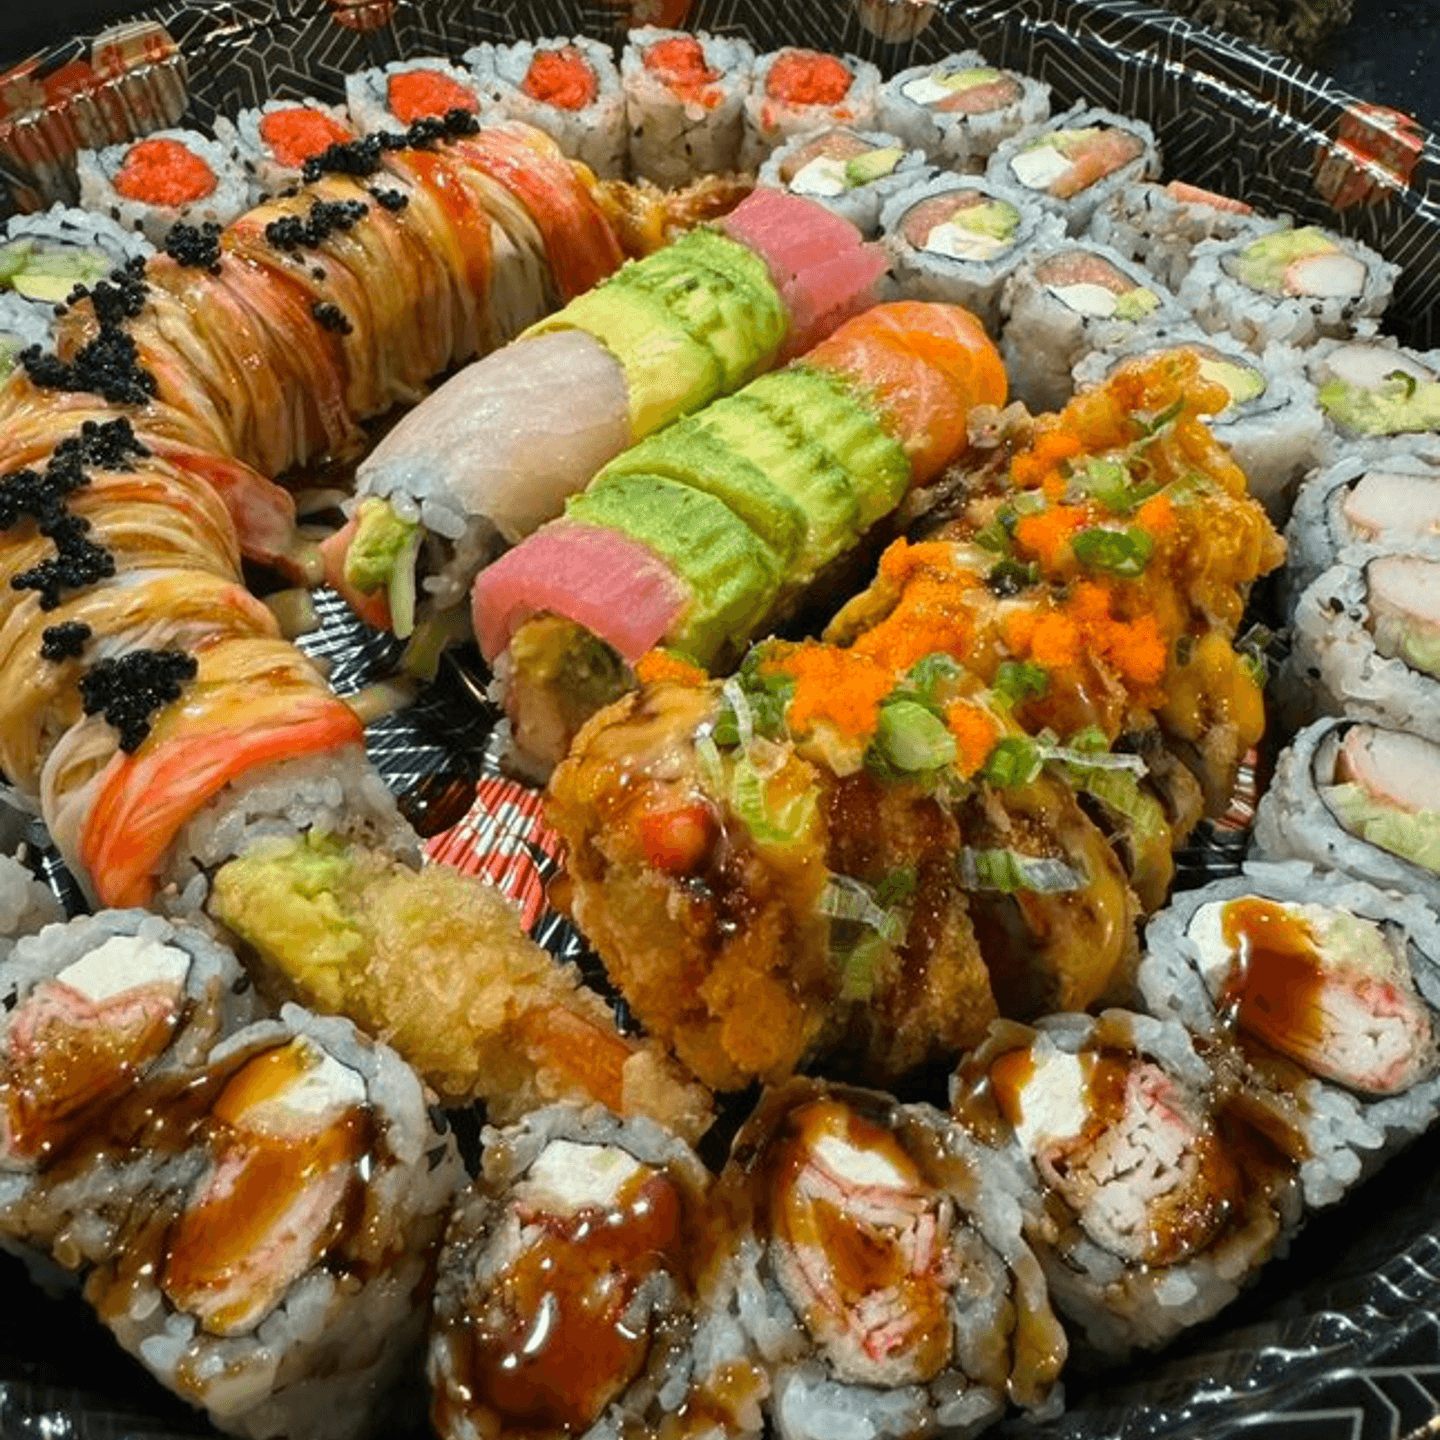 What Makes Our Sushi Platter Special?